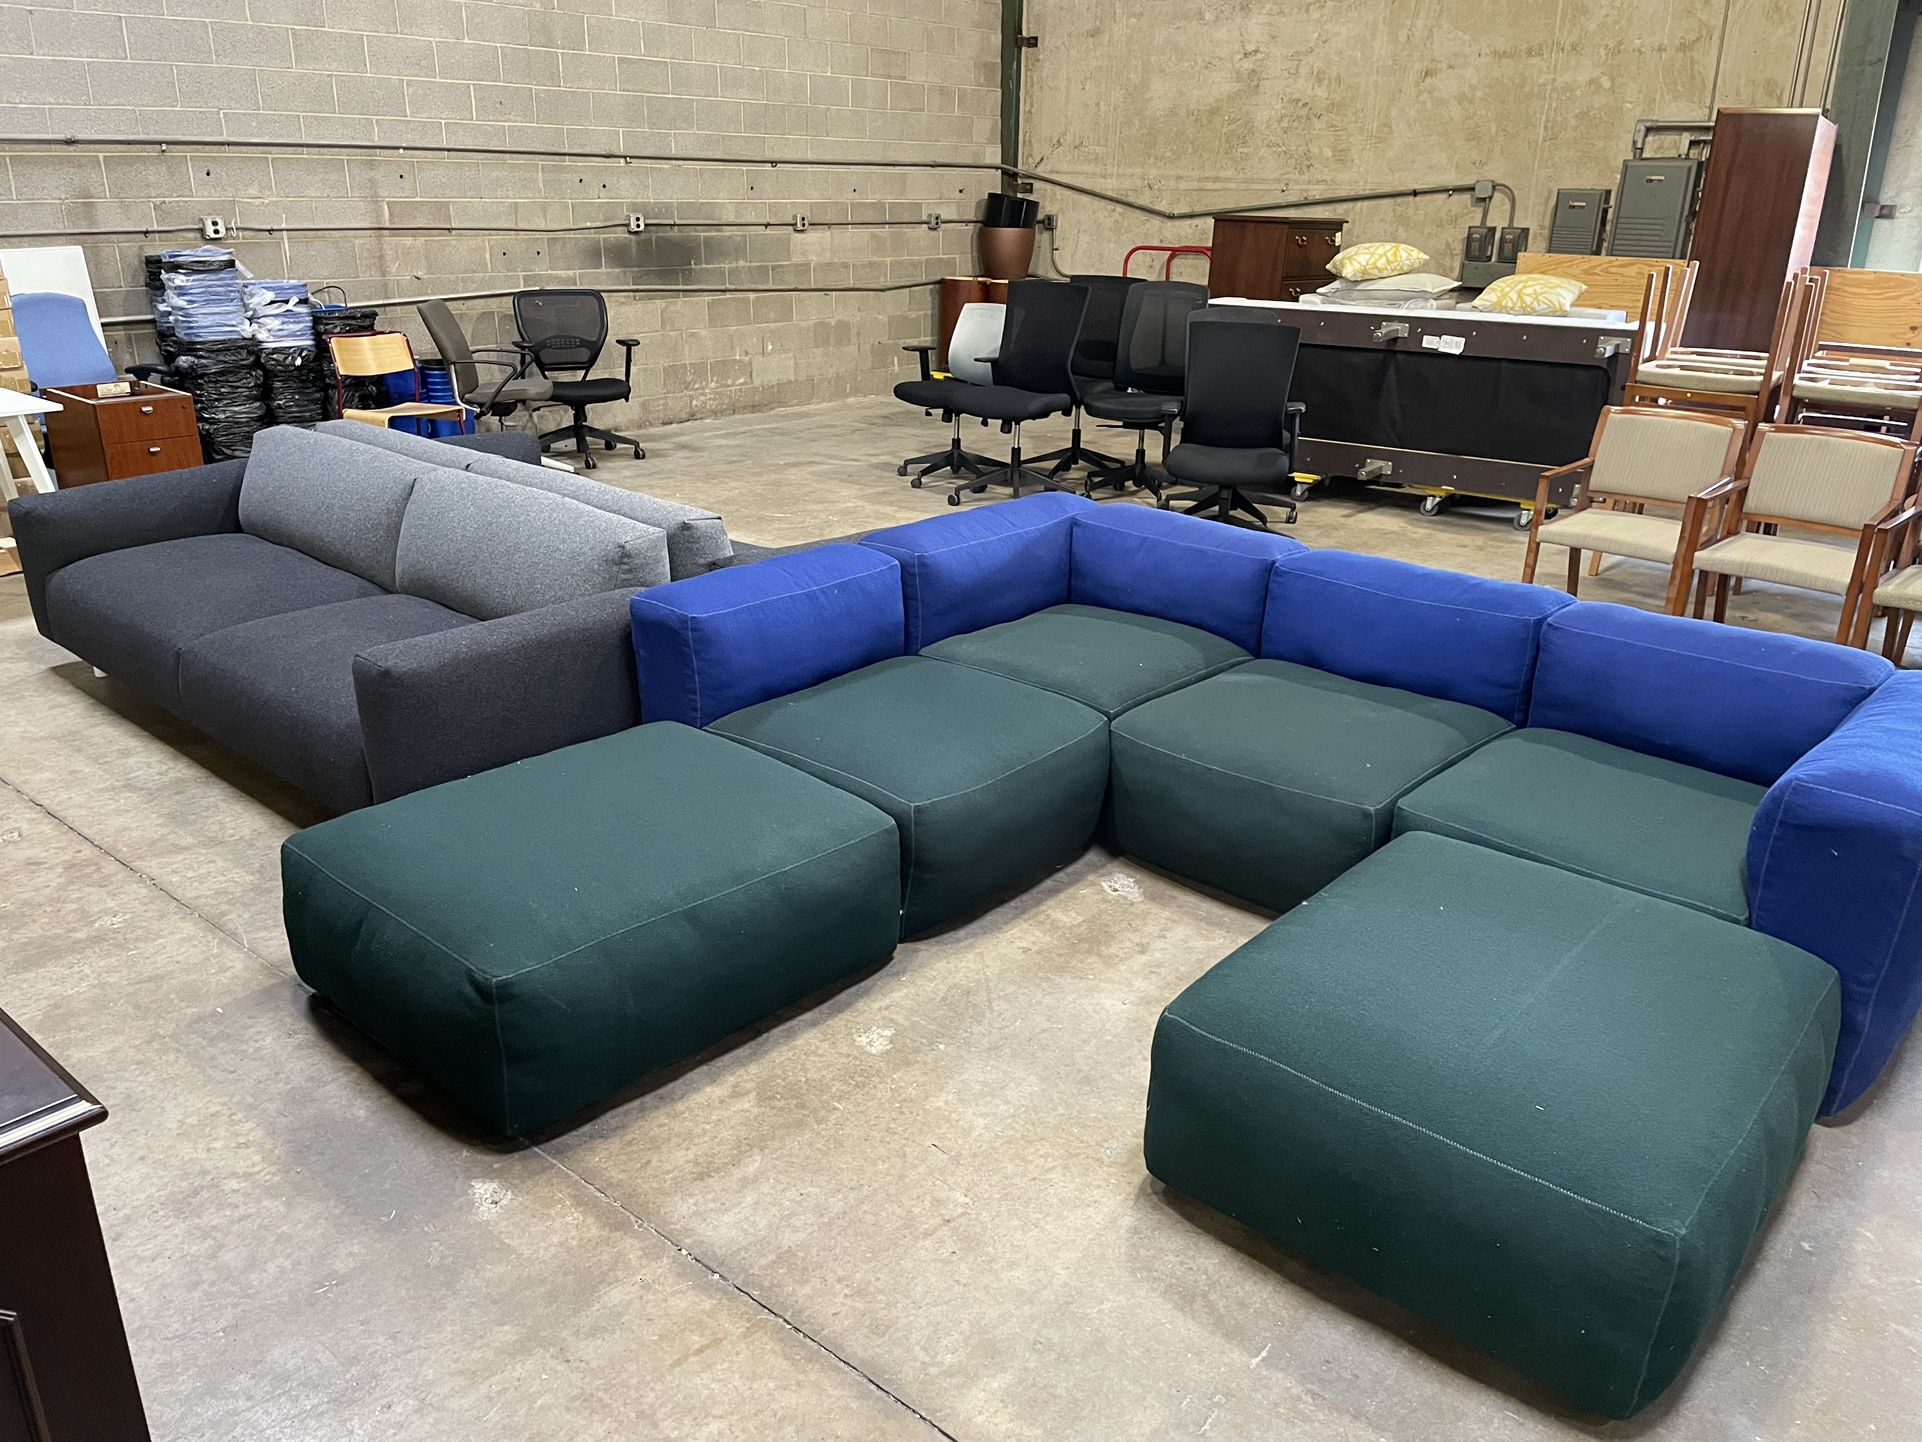 Large 9’ Home Or Office Low Profile Couch! Only $175!! U-shape